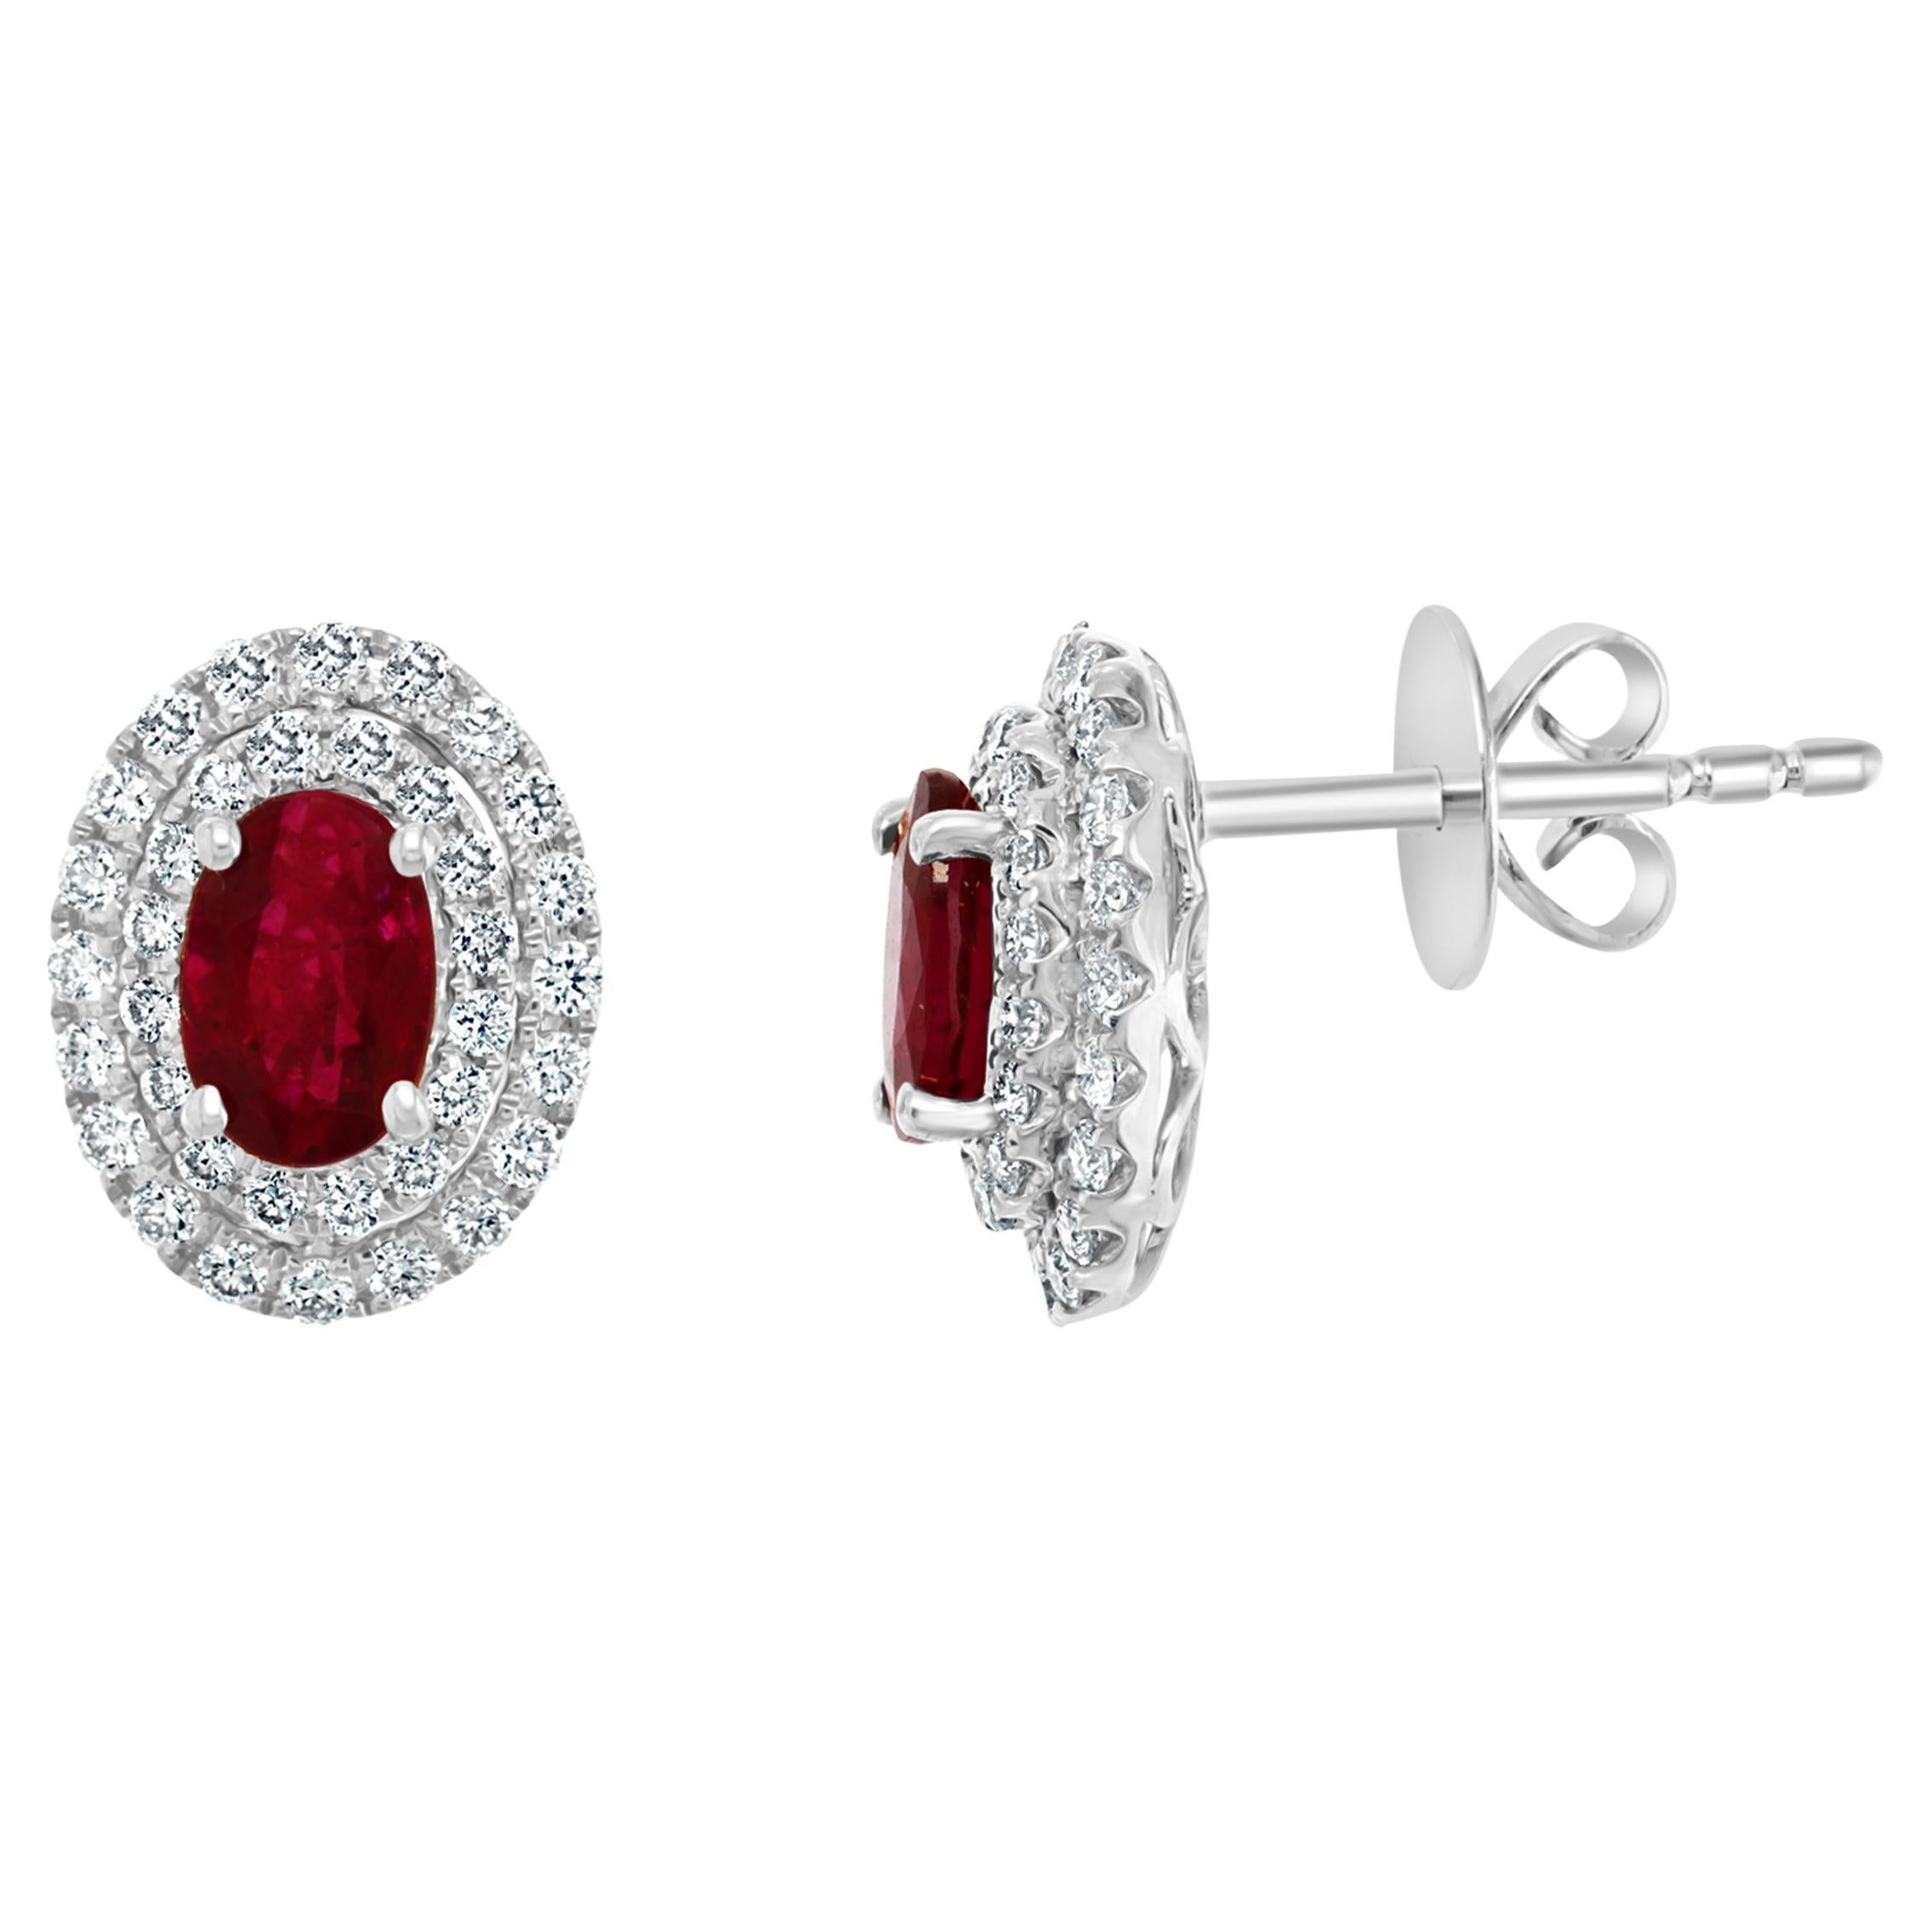 0.98 Carat Oval Cut Ruby and Diamond Stud Earrings in 18K White Gold For Sale